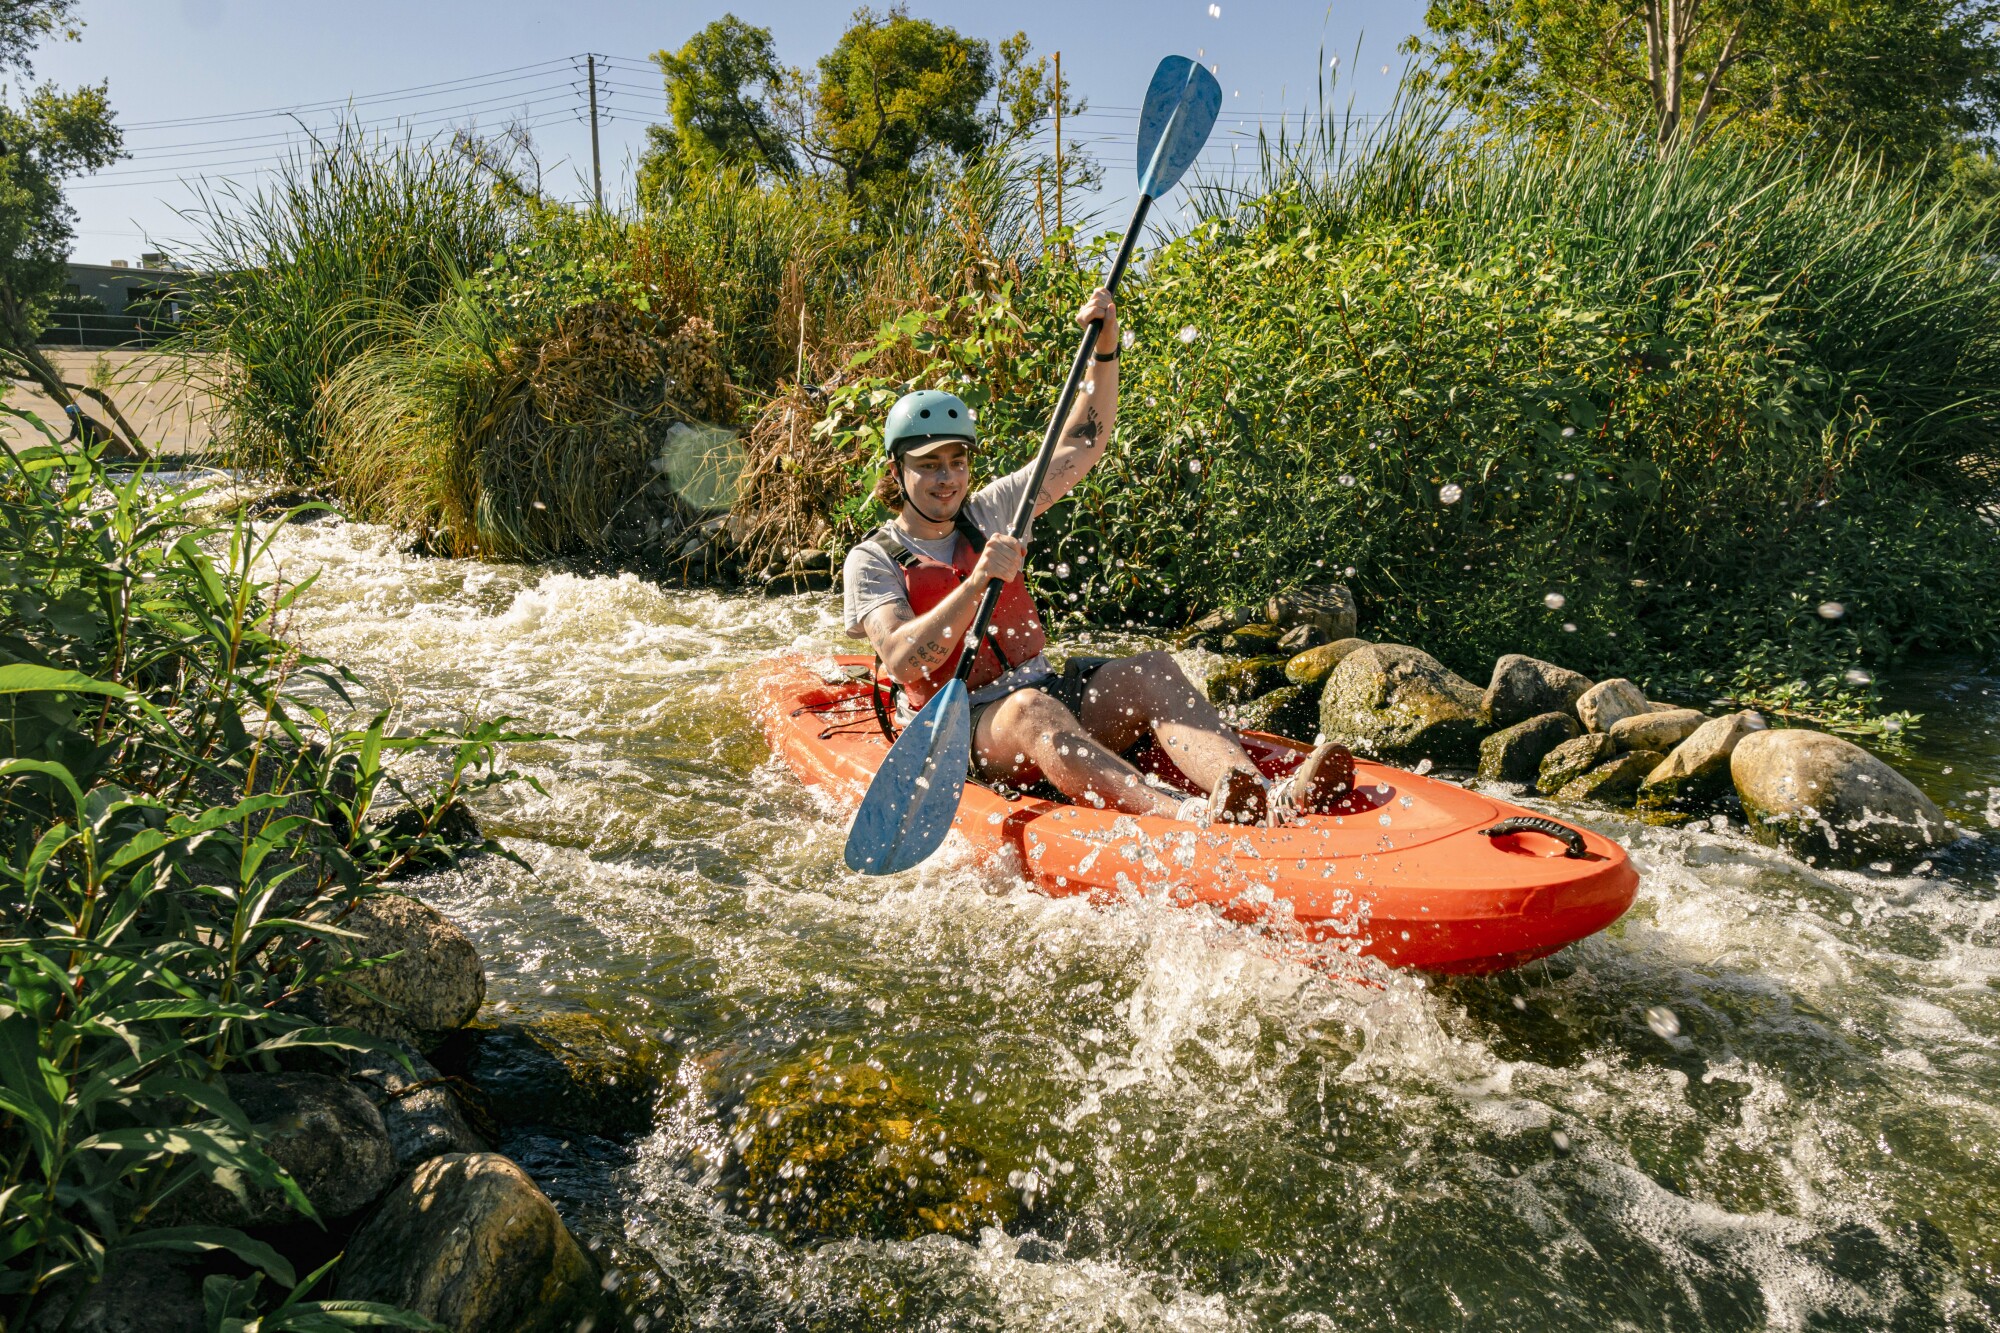 A man kayaks through the rapids on the Los Angeles River.